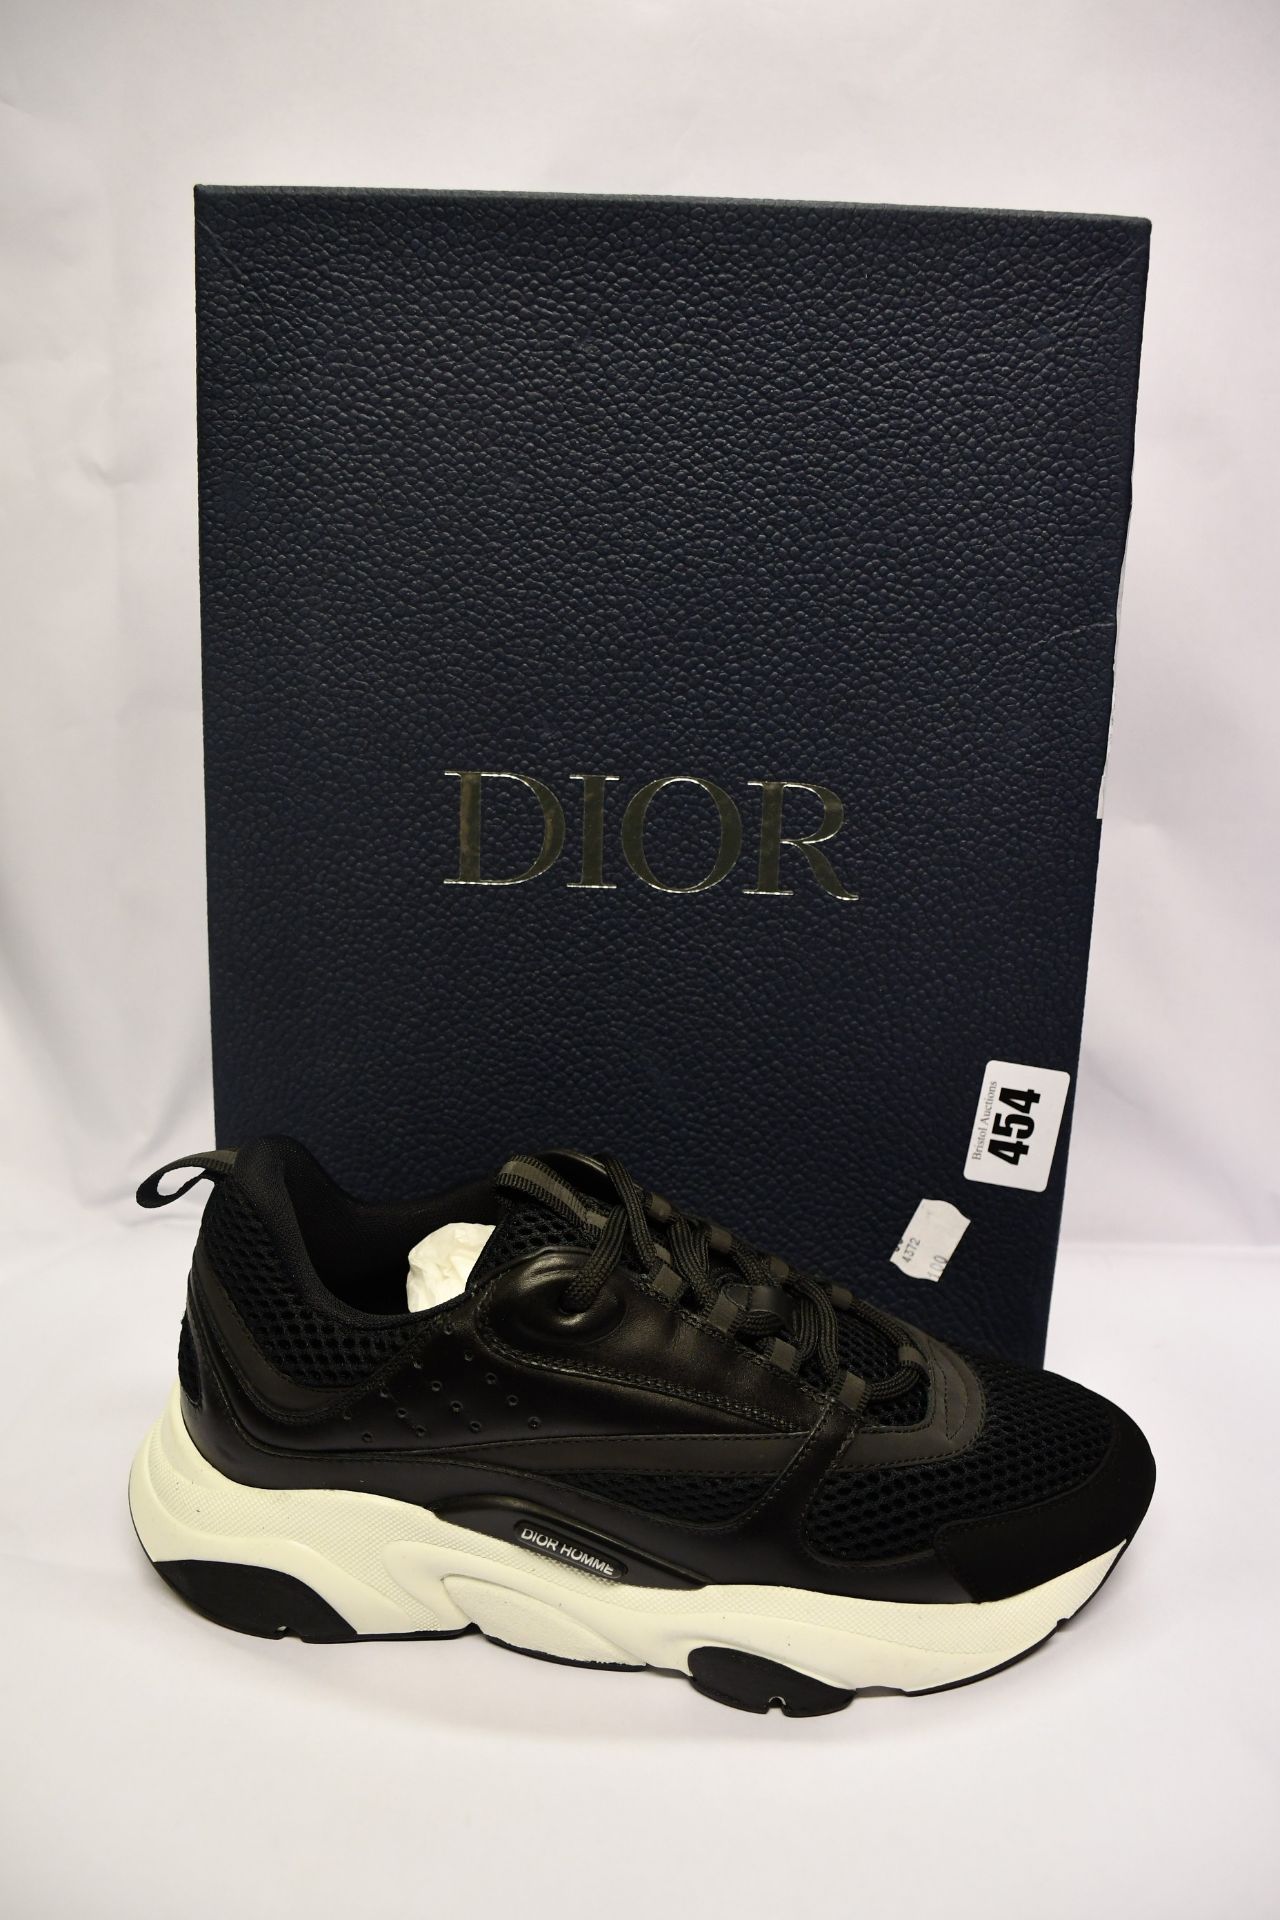 A pair of as new Dior B22 sneakers (EU 40 - RRP £820).